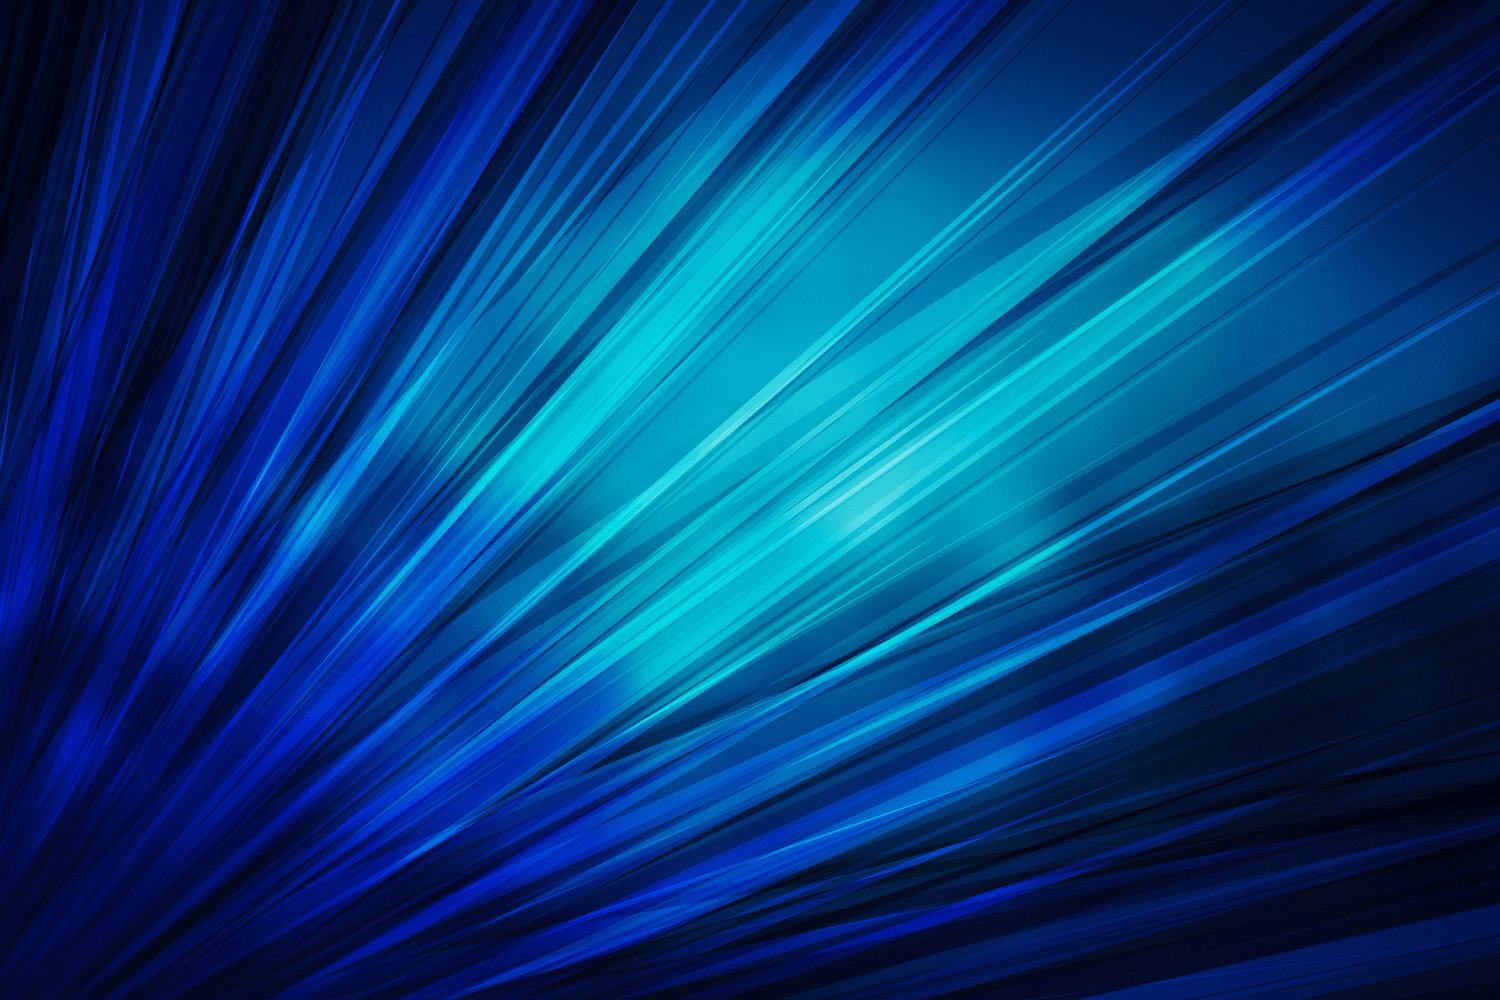 Dark Blue abstract image with lines